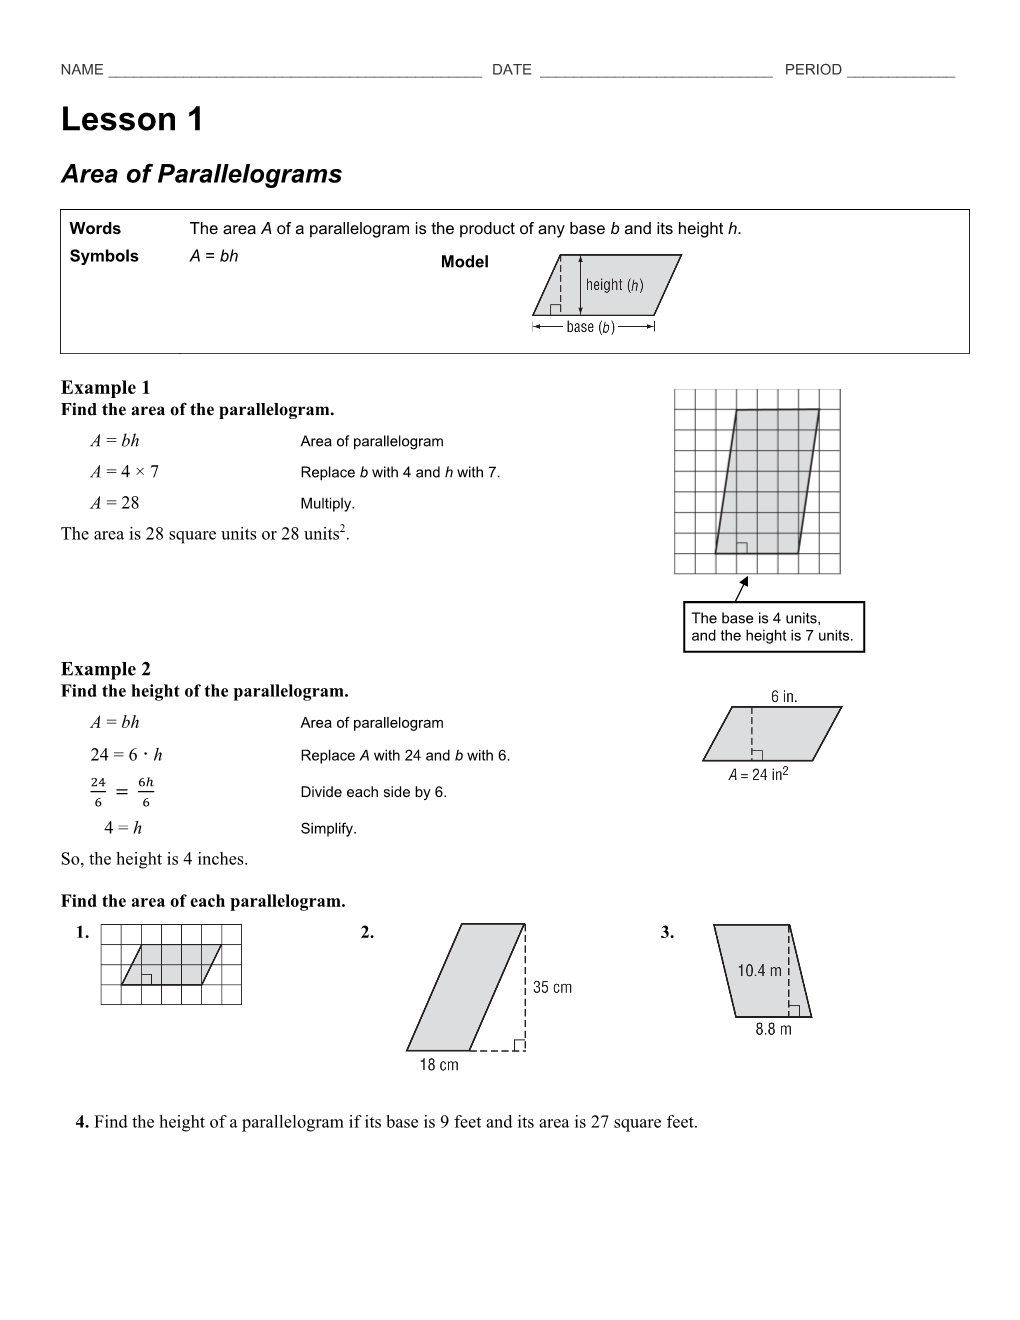 Lesson 9 Surface Area of Triangular Prisms